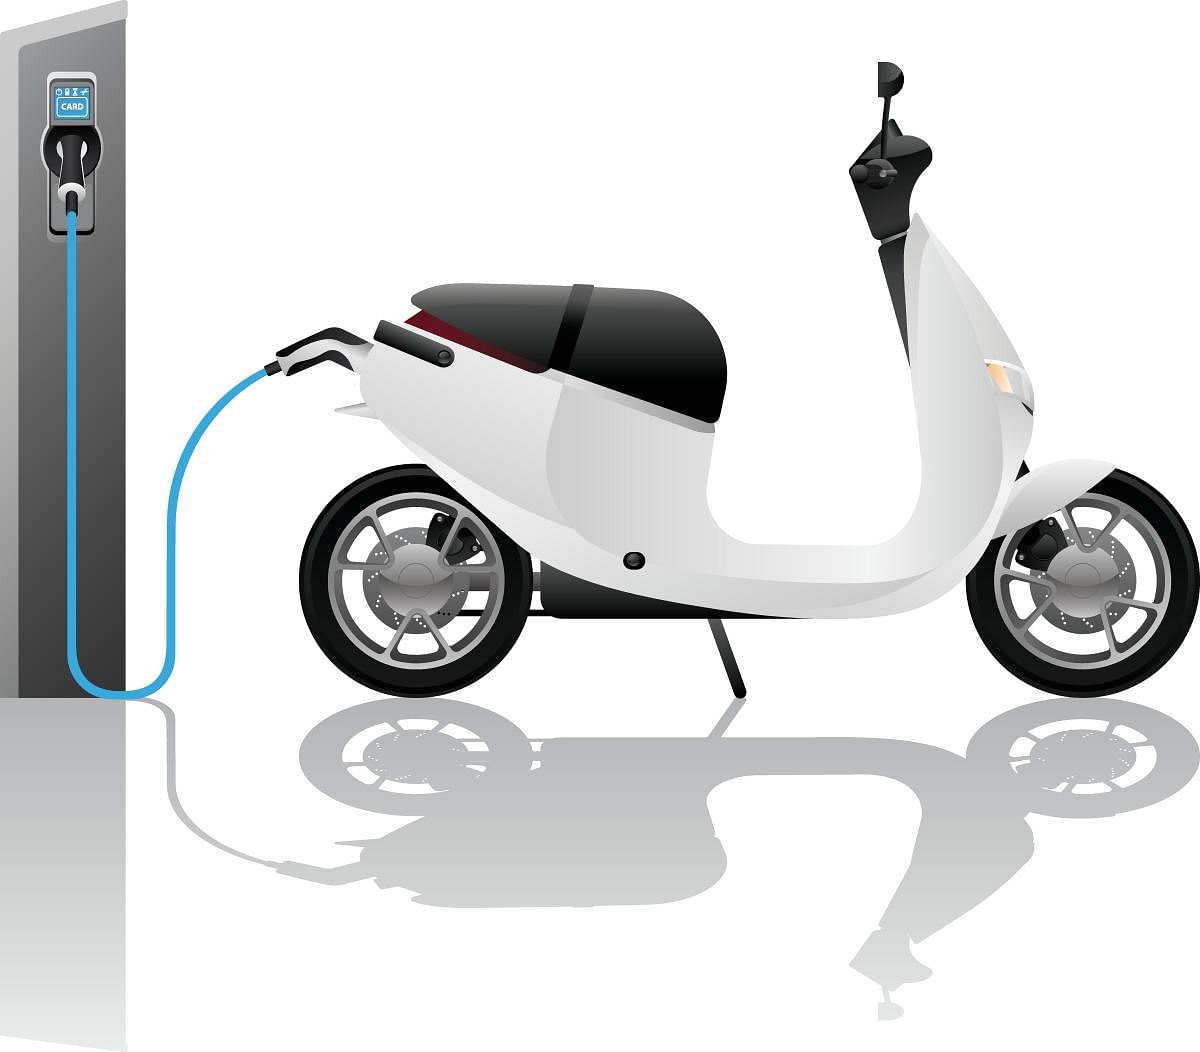 Electric scooter. Credit: DH pool photo